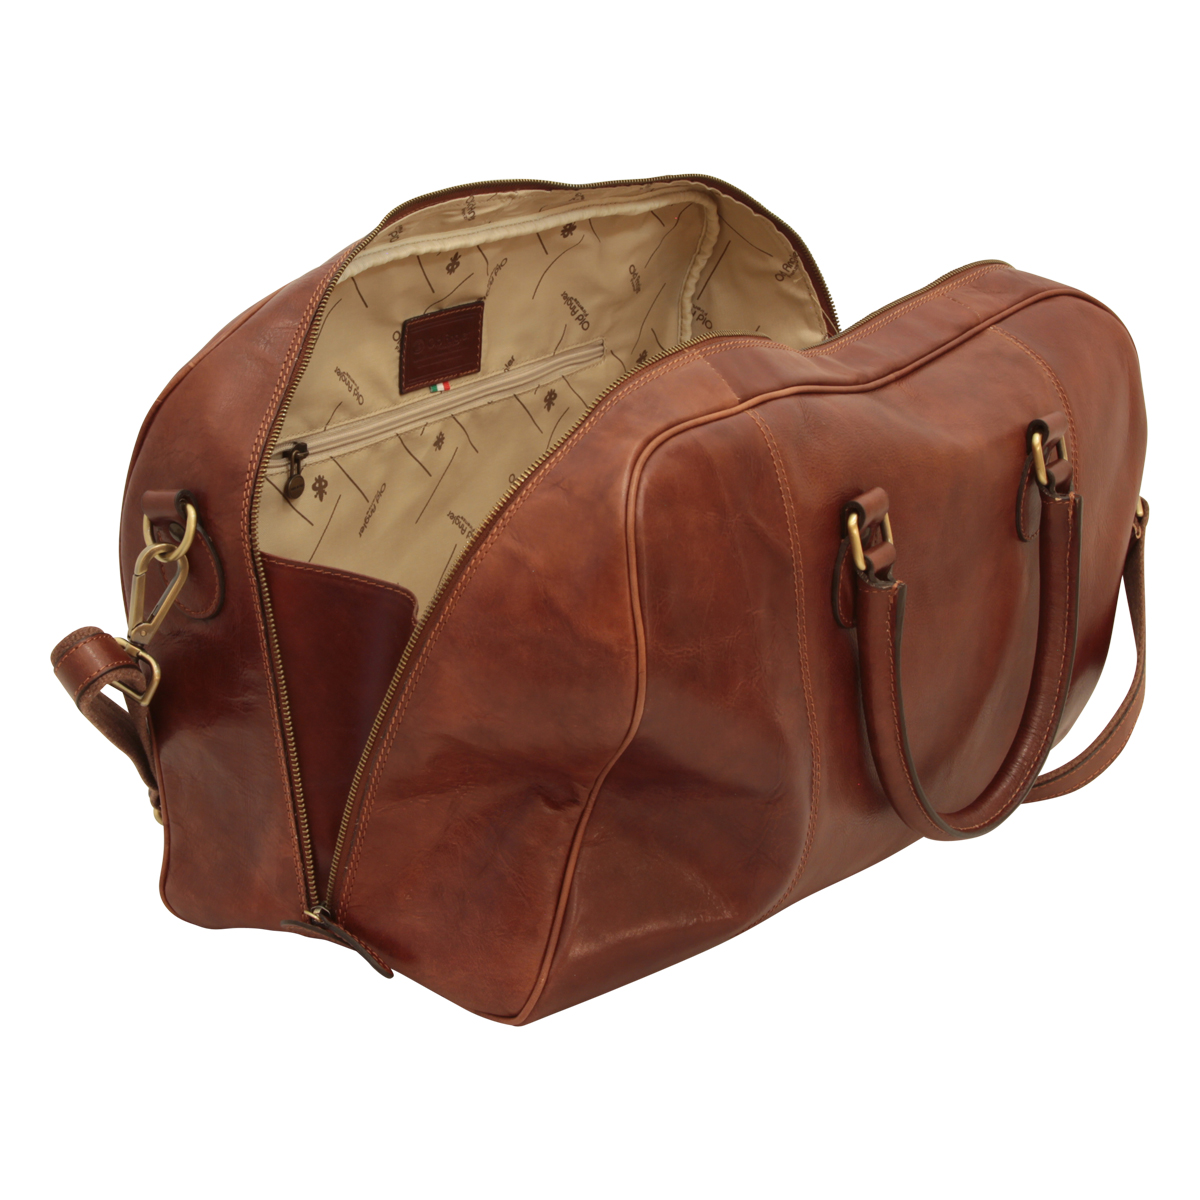 Leather Duffel Bag - Brown | 404289MA US | Old Angler Firenze